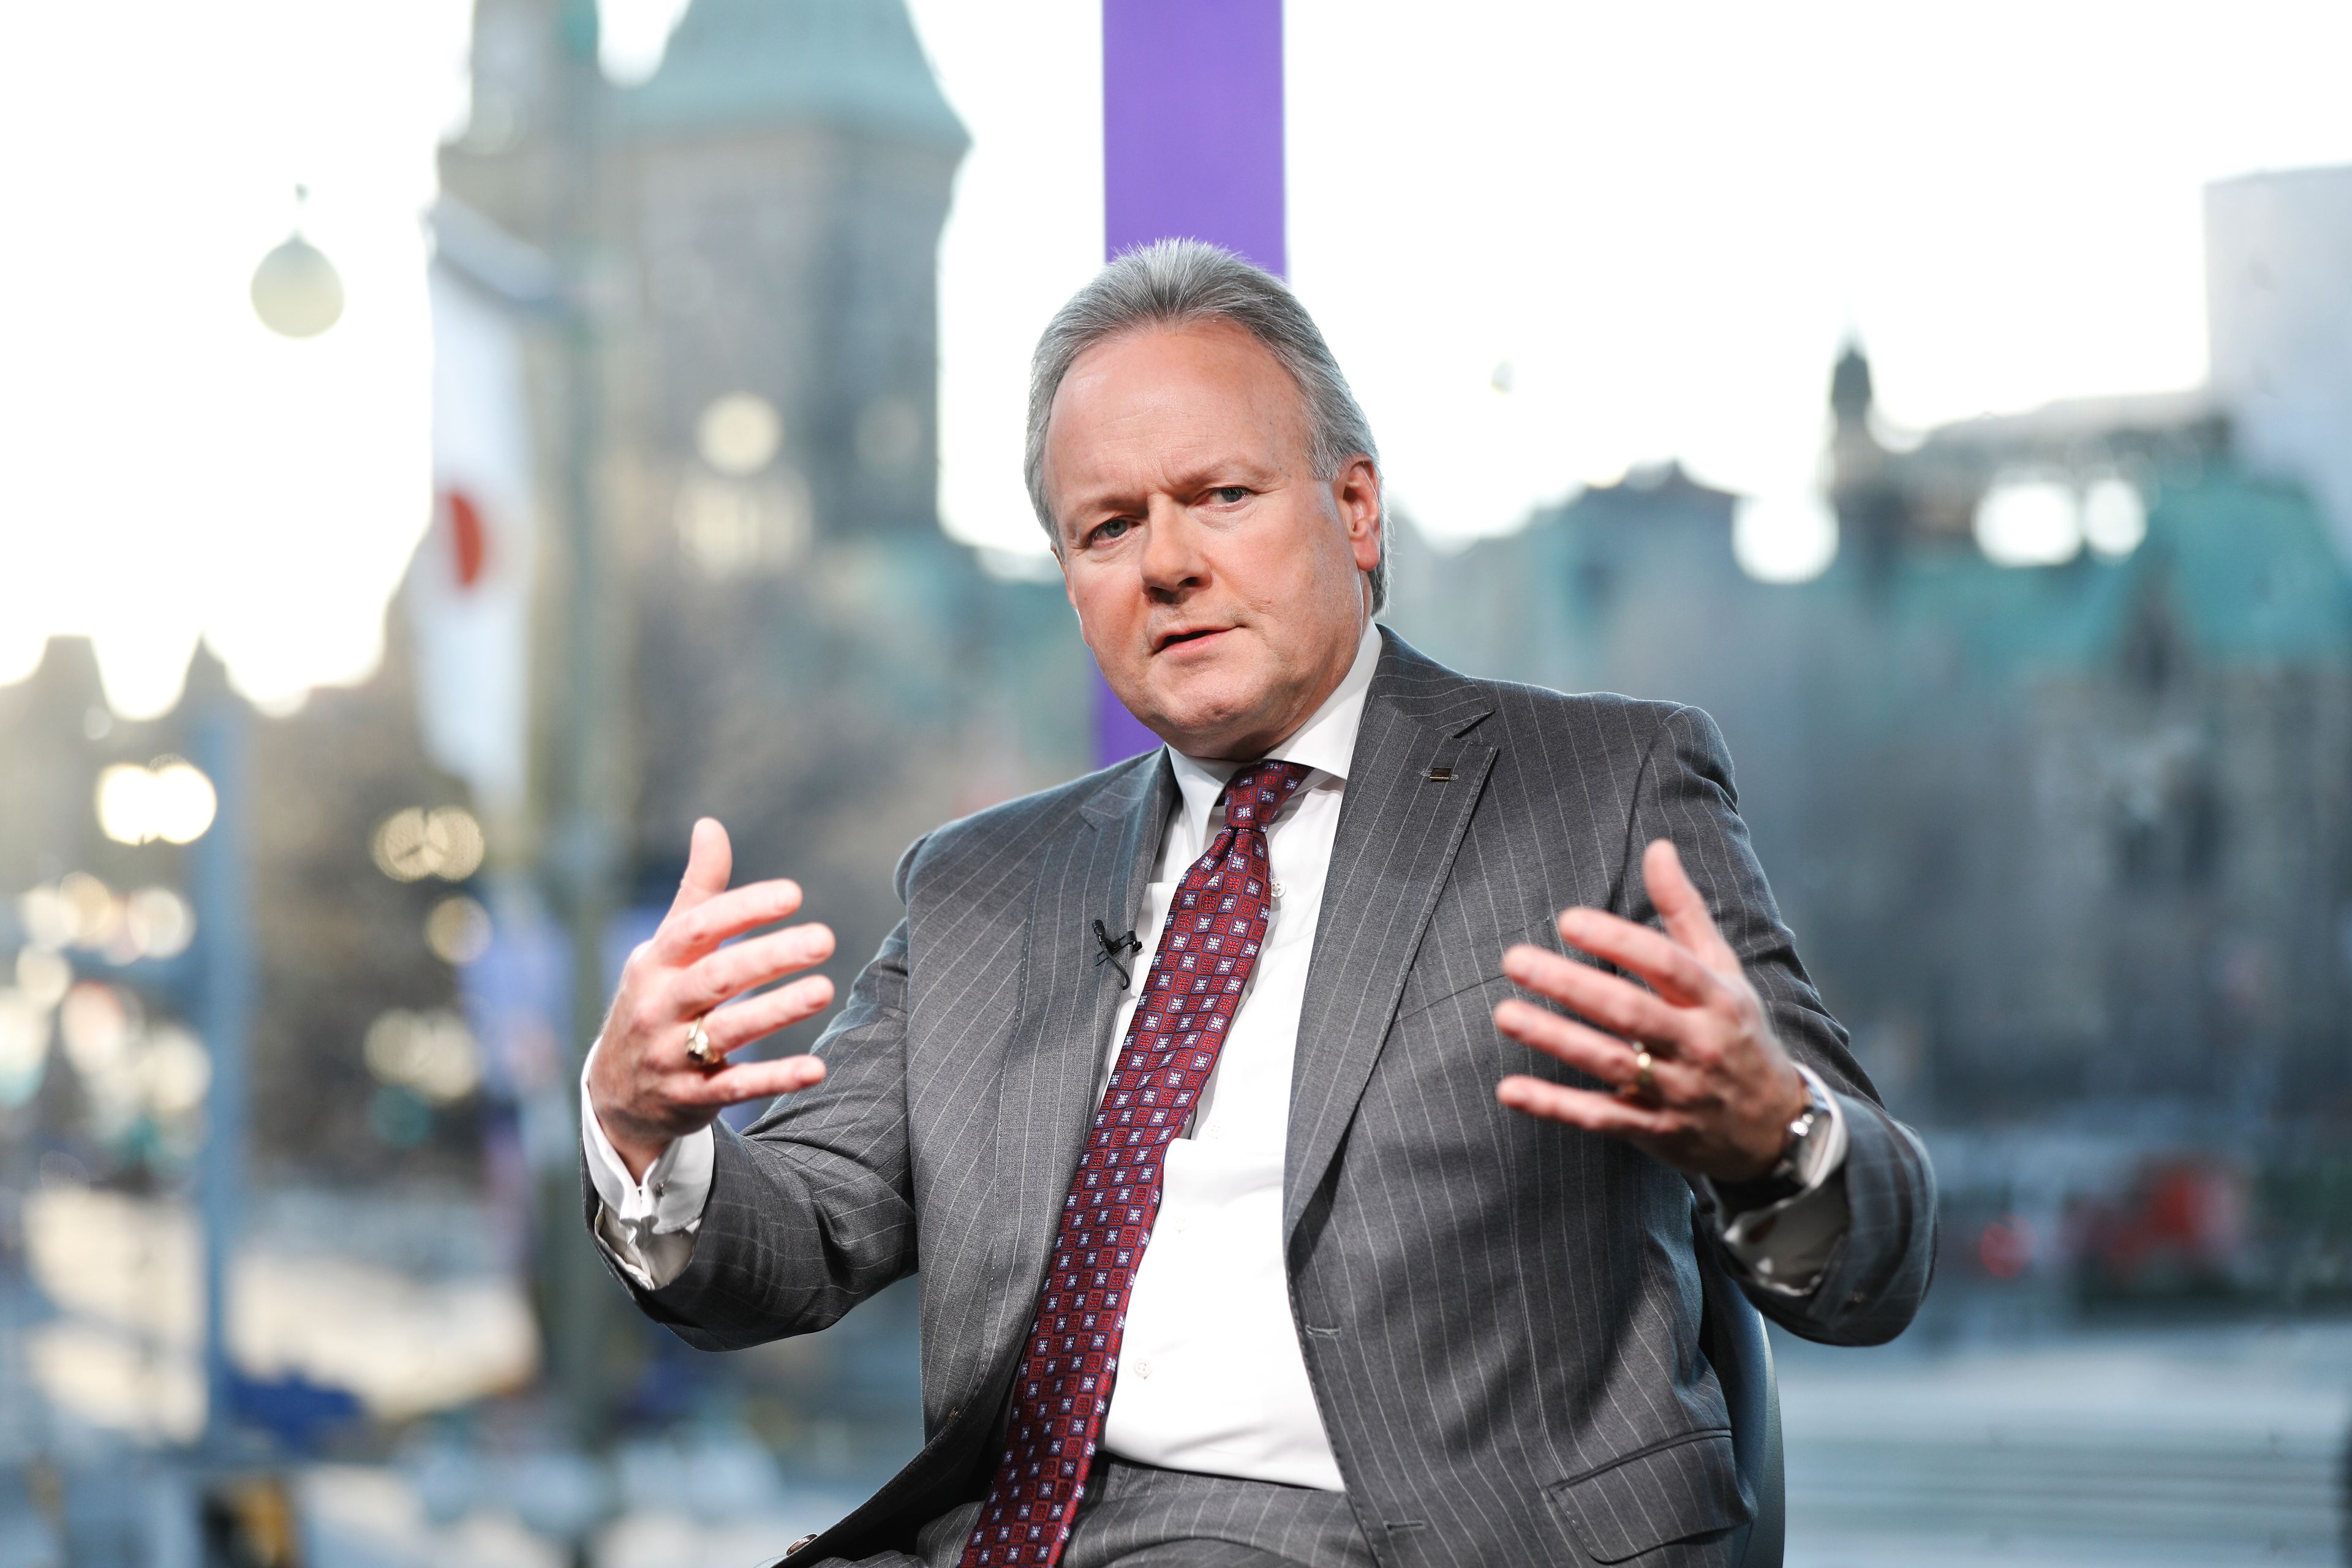 STEPHEN-POLOZ-MACLEANS-LIVE-01